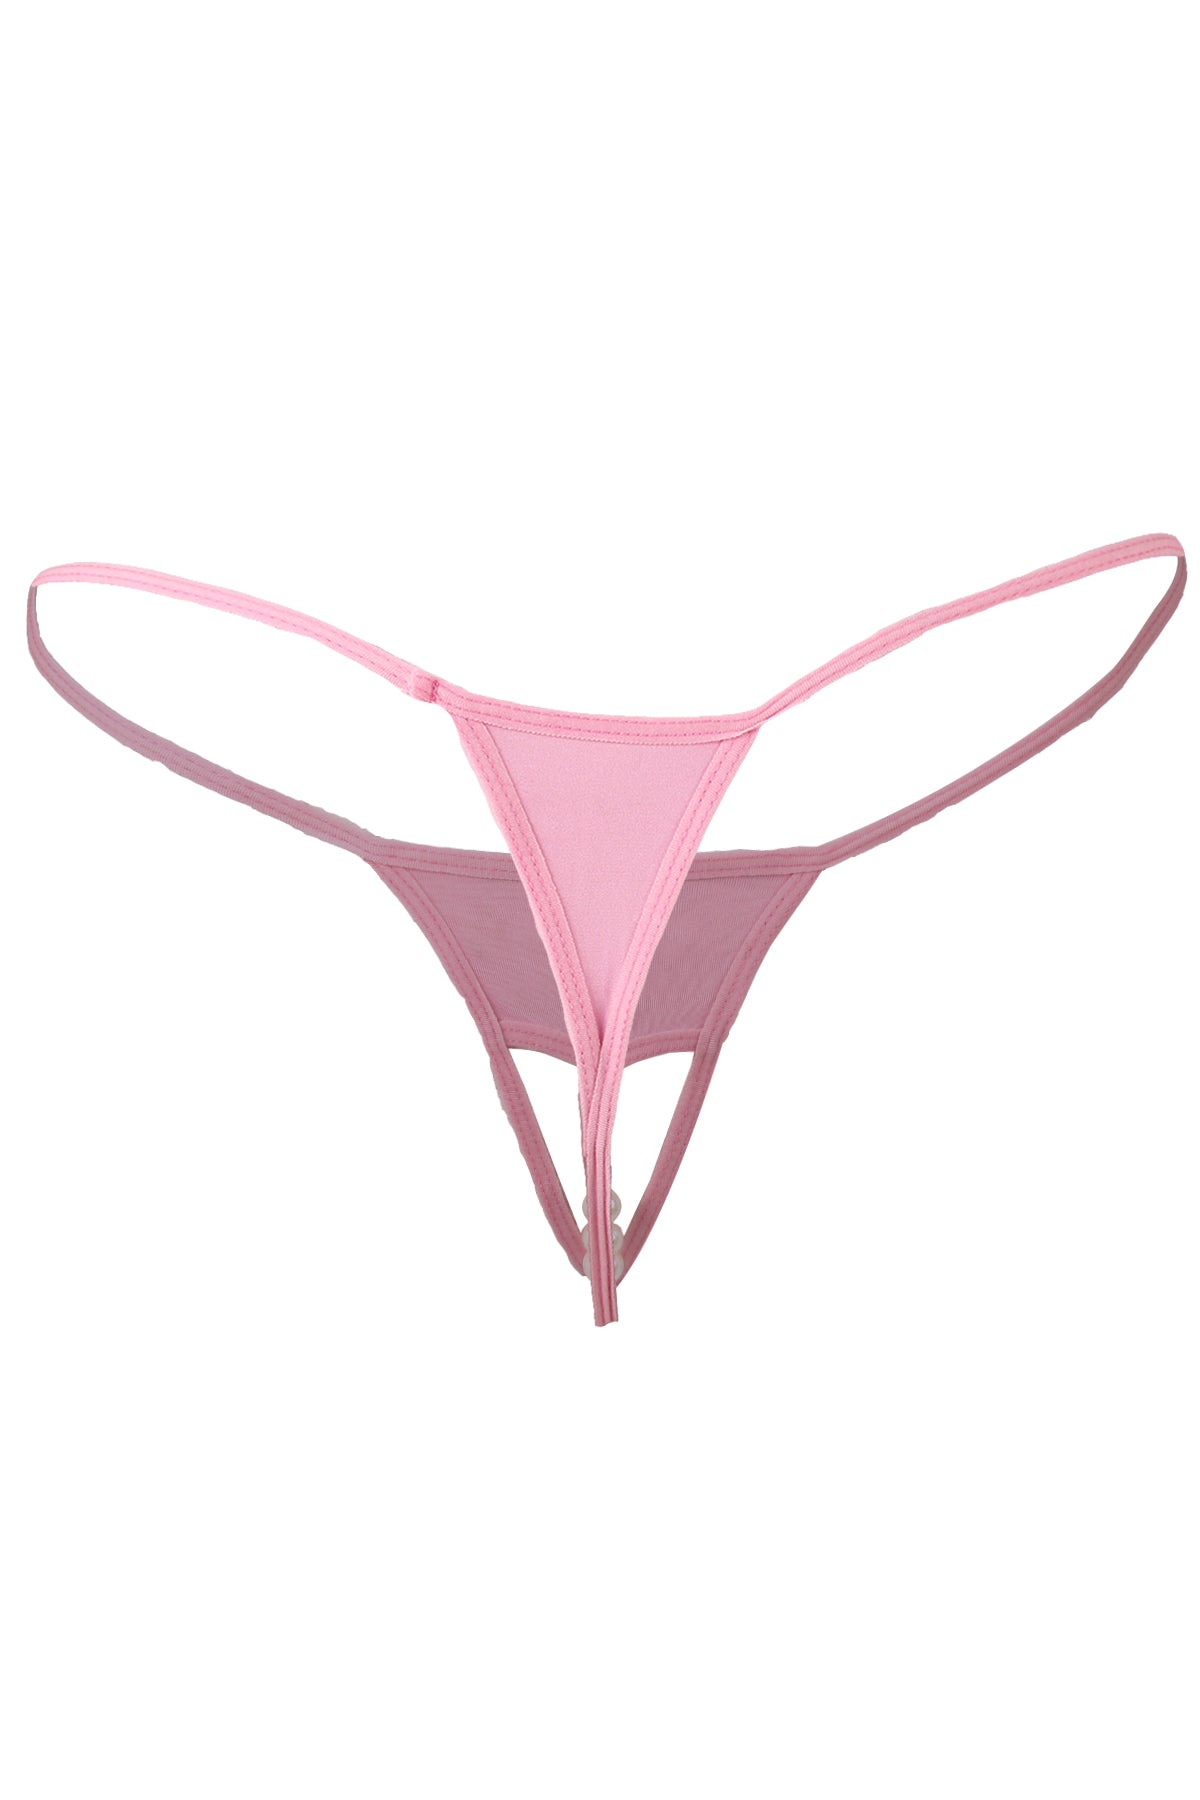 Kaamastra Womens Sexy Open Crotch Pearl Thong Pink